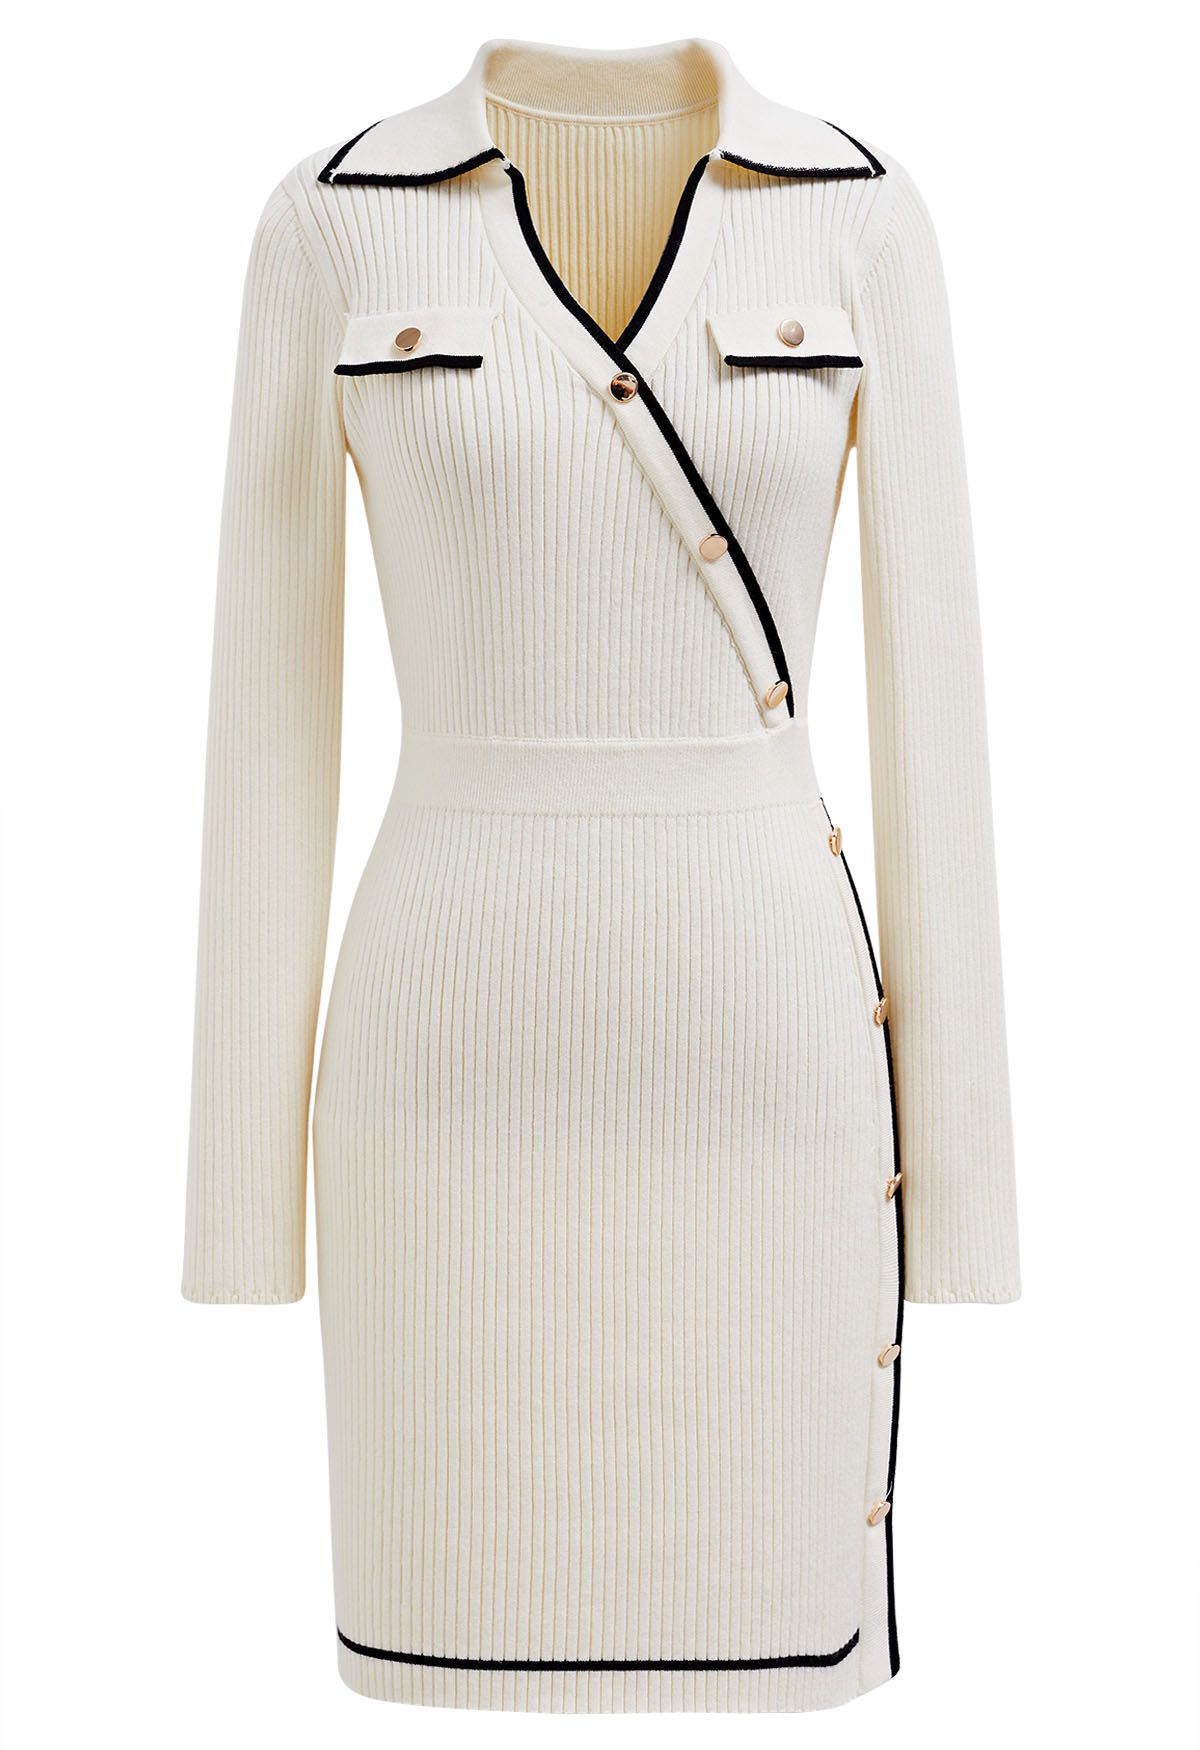 Collared Golden Button Decorated Ribbed Knit Dress in Cream